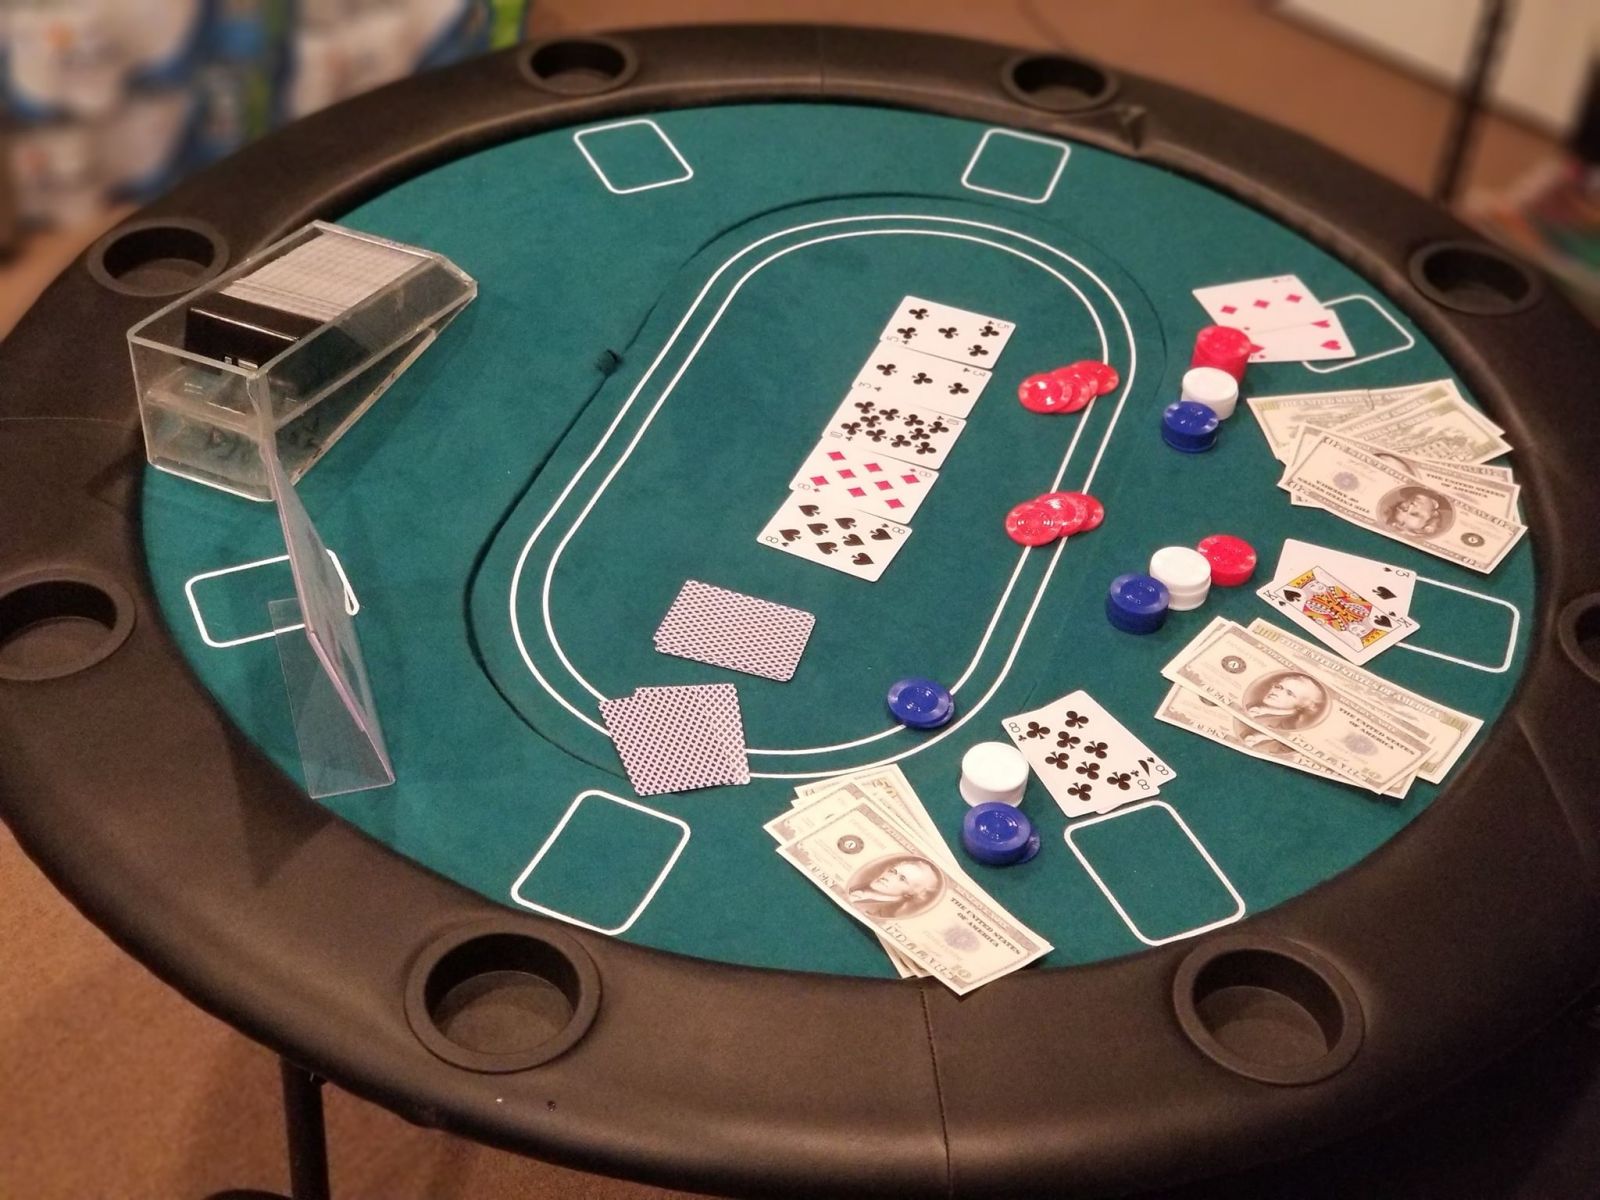 Round Poker Table Casino Games | www.3monkeysinflatables.com